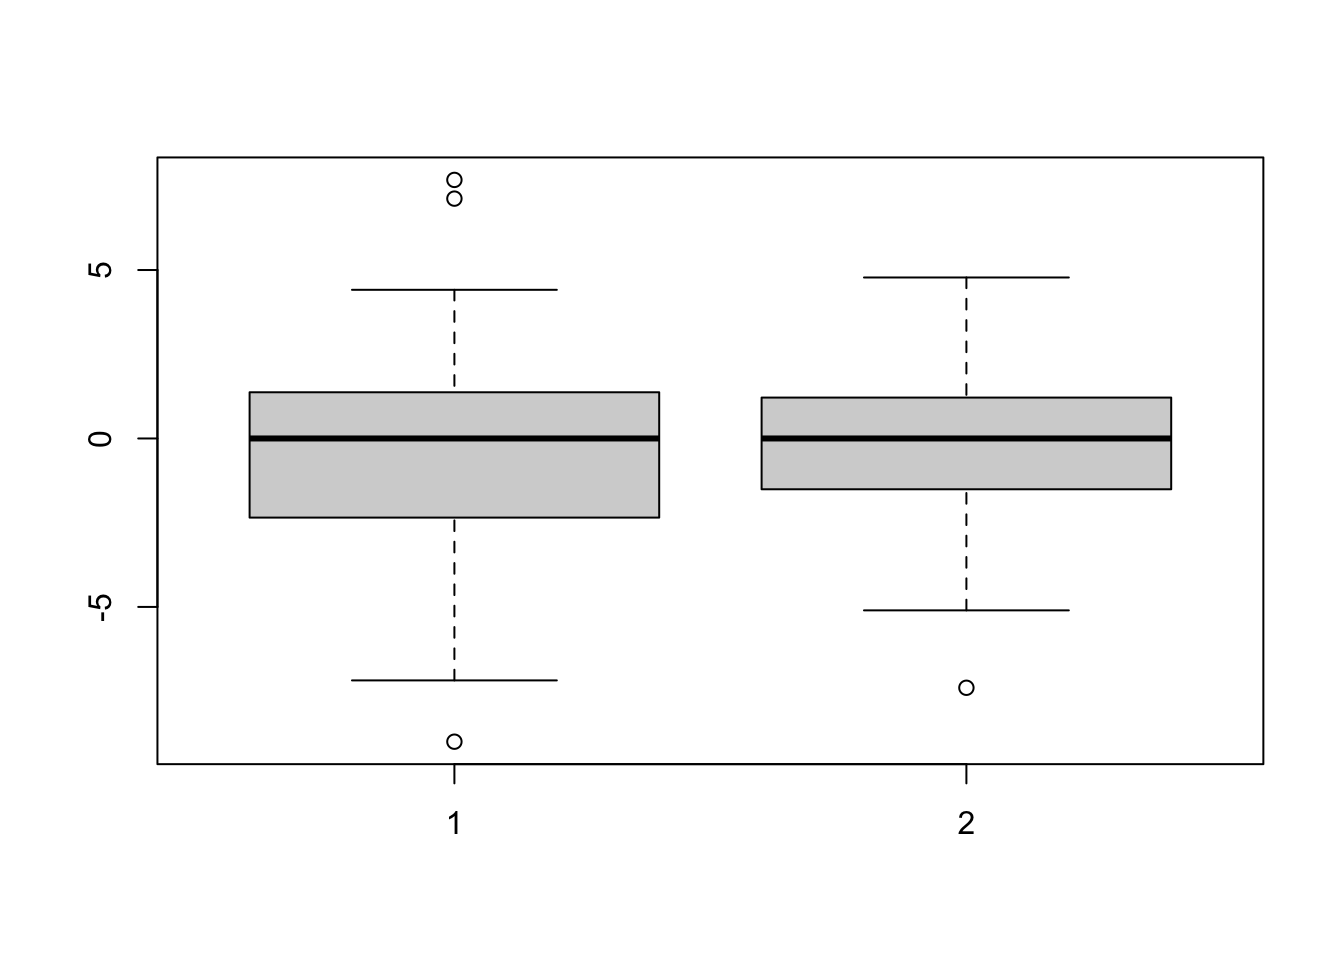 Boxplots of data from distributions with different variances.